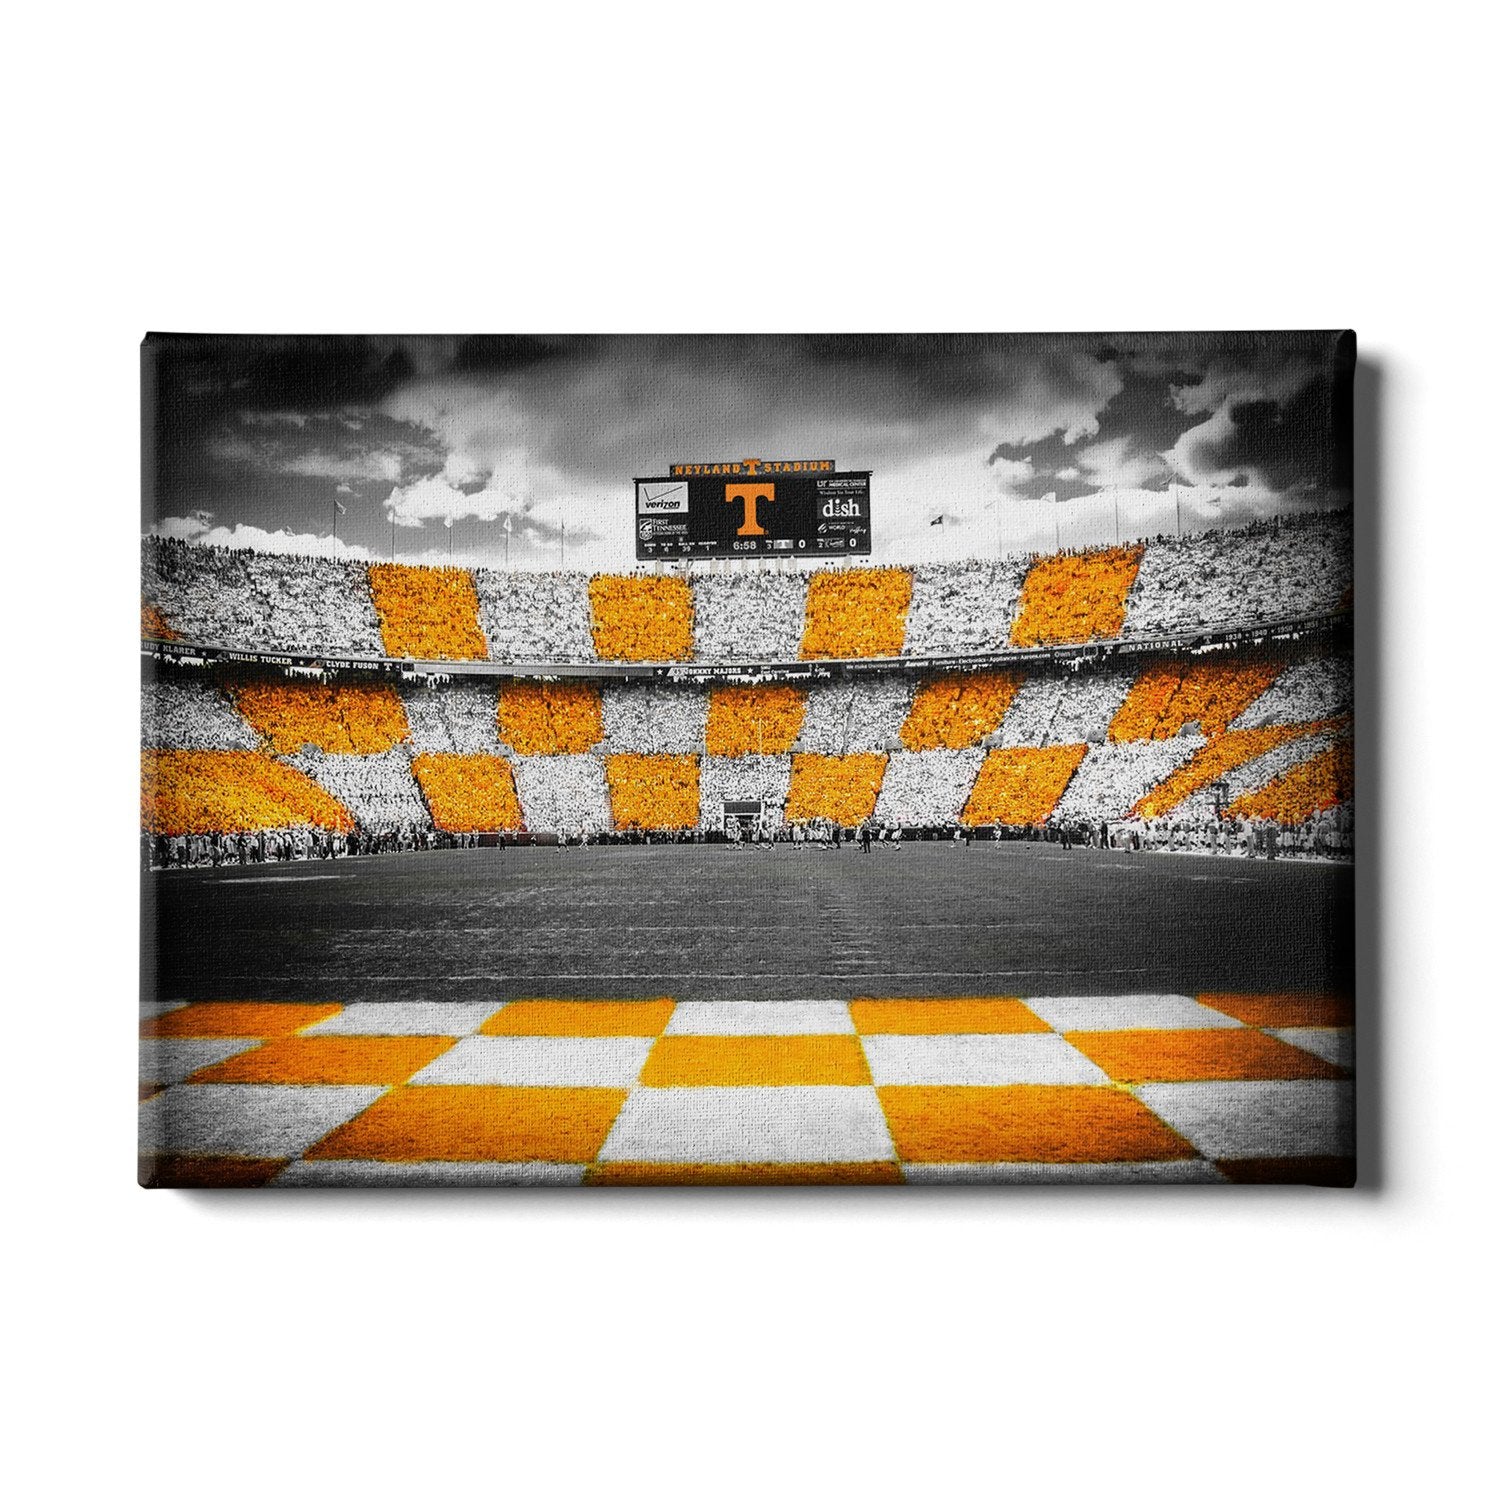 Tennessee Volunteers - It's Baseball Time in Tennessee - Vol Wall Art